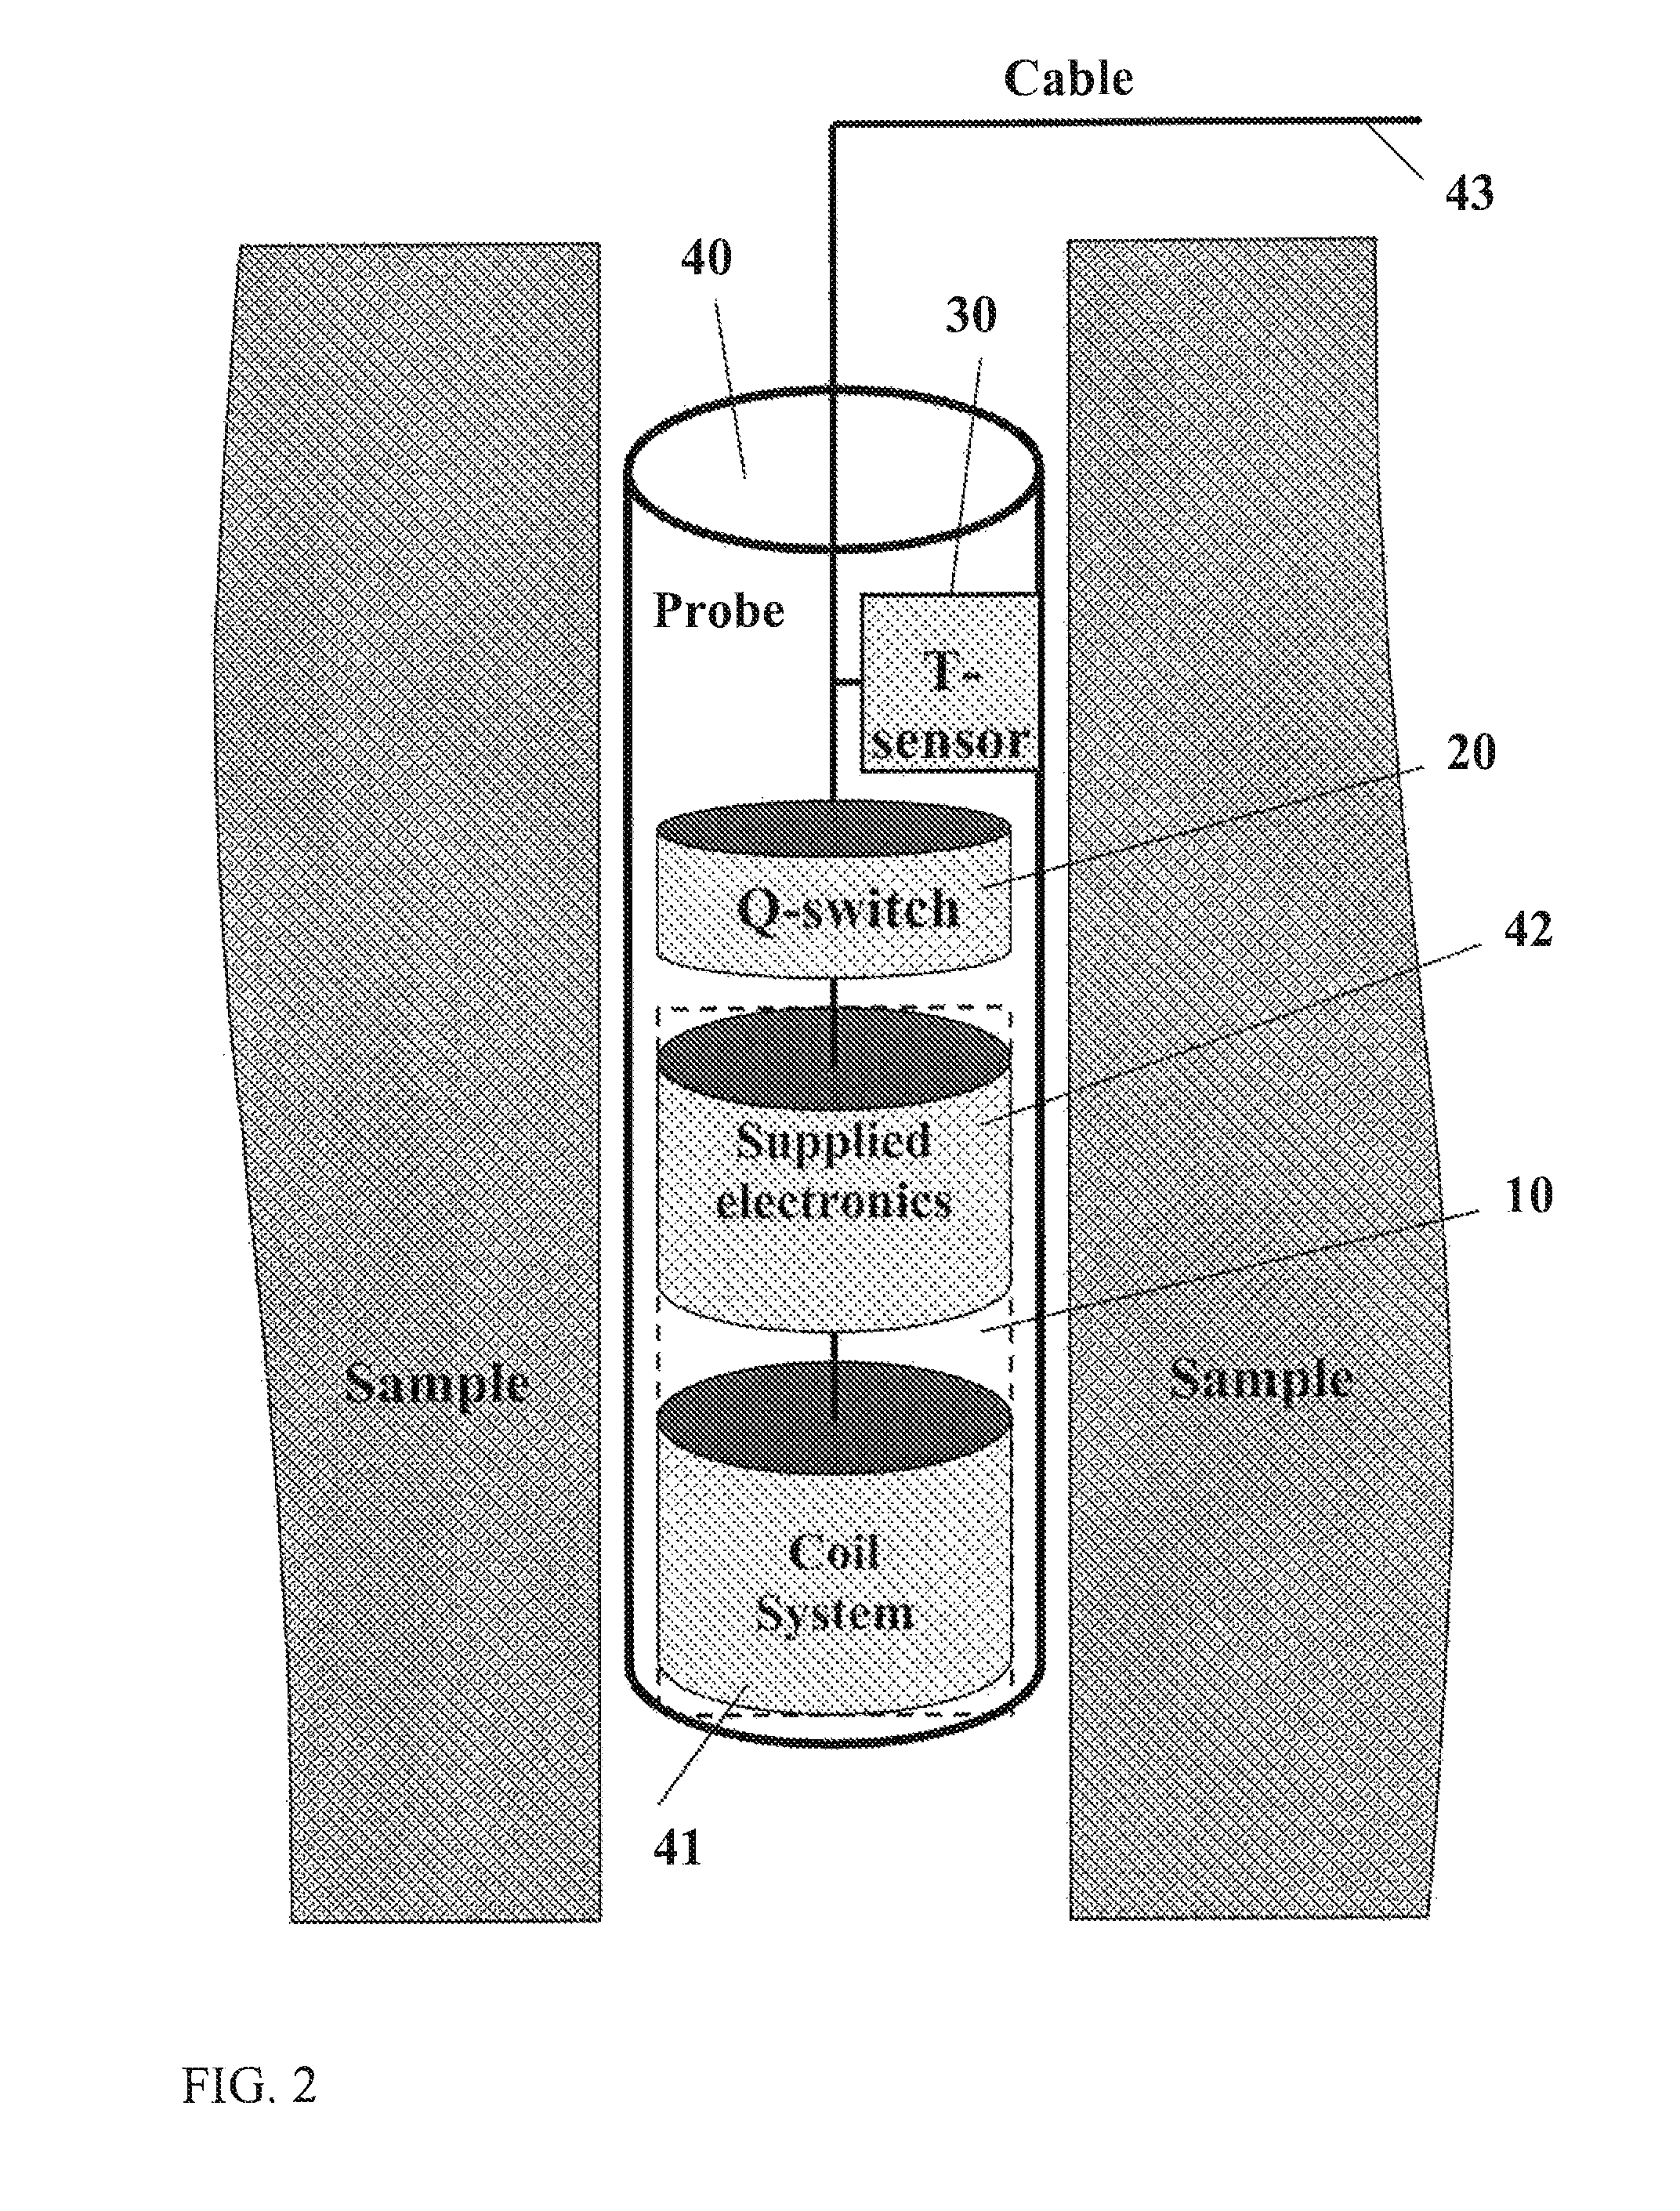 Method and apparatus usable for mining and mineral exploration